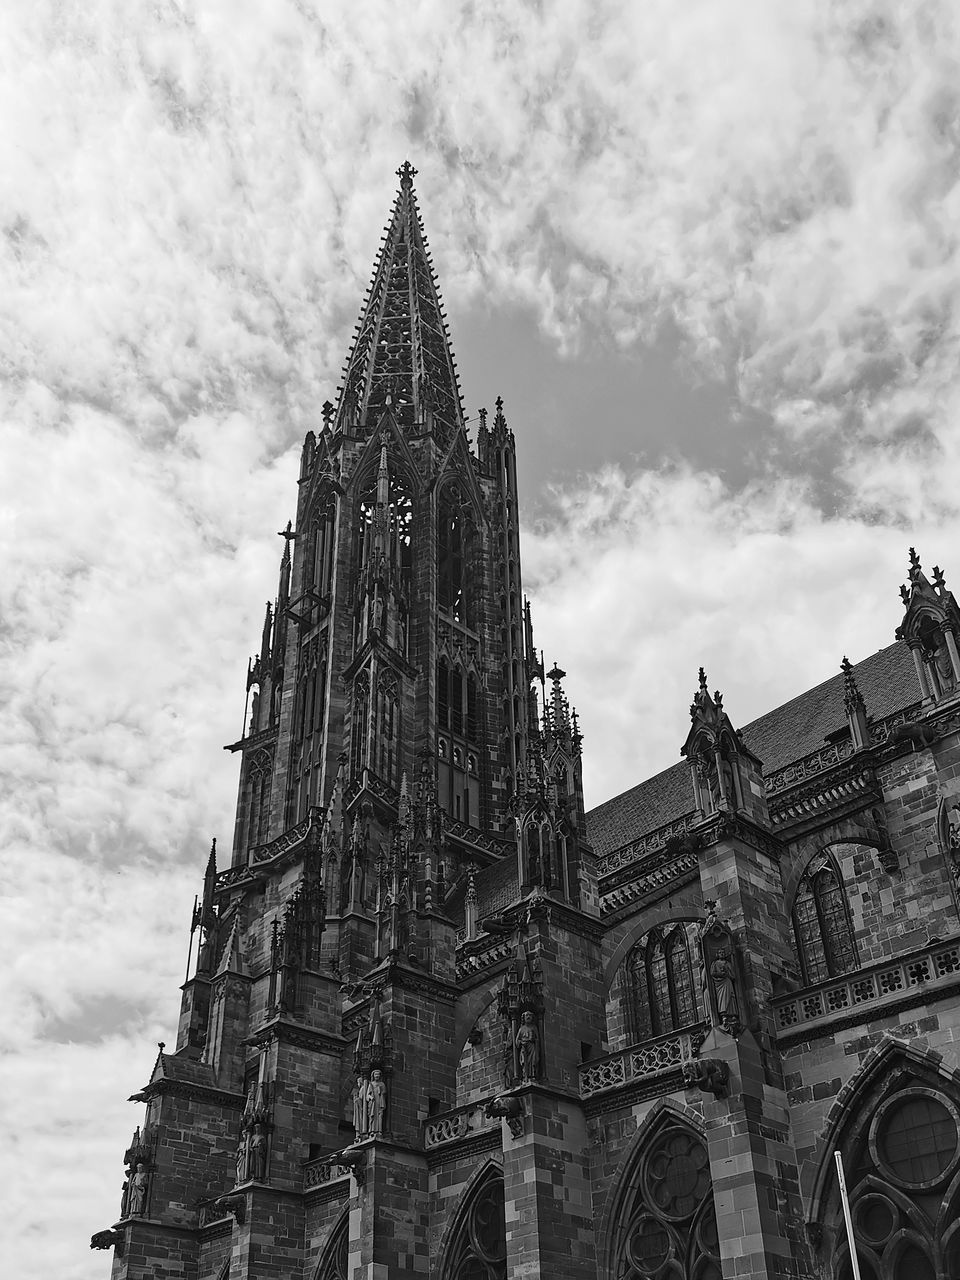 architecture, built structure, building exterior, sky, building, black and white, travel destinations, religion, spire, place of worship, history, low angle view, the past, belief, cloud, tower, spirituality, monochrome, landmark, monochrome photography, travel, worship, nature, tourism, city, no people, gothic style, day, outdoors, catholicism, steeple